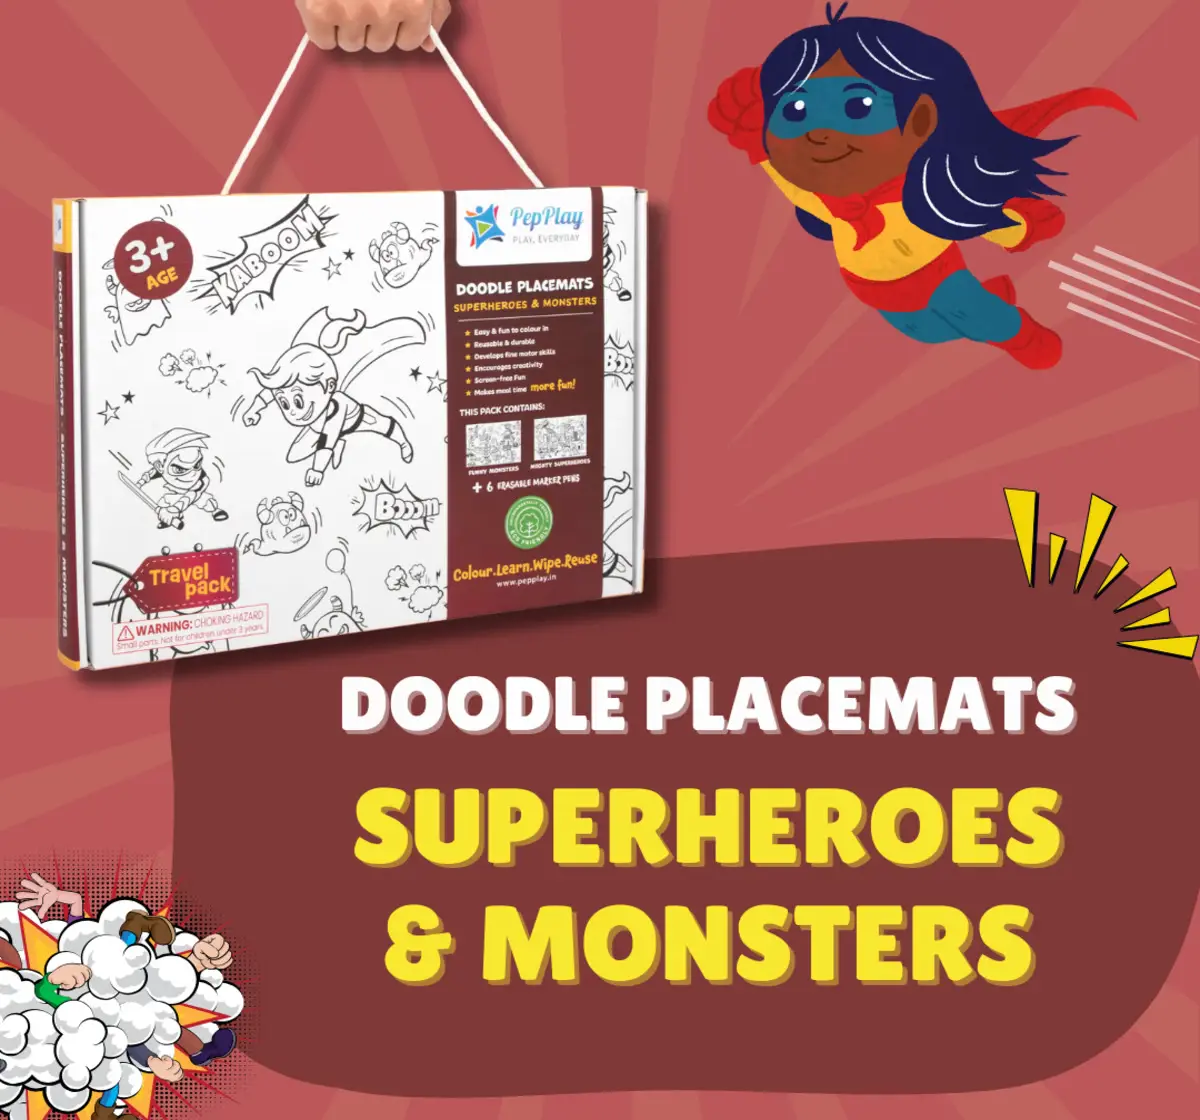 PepPlay Doodle Placemats Superheroes & Monsters For Kids of Age 3Y+, Multicolour